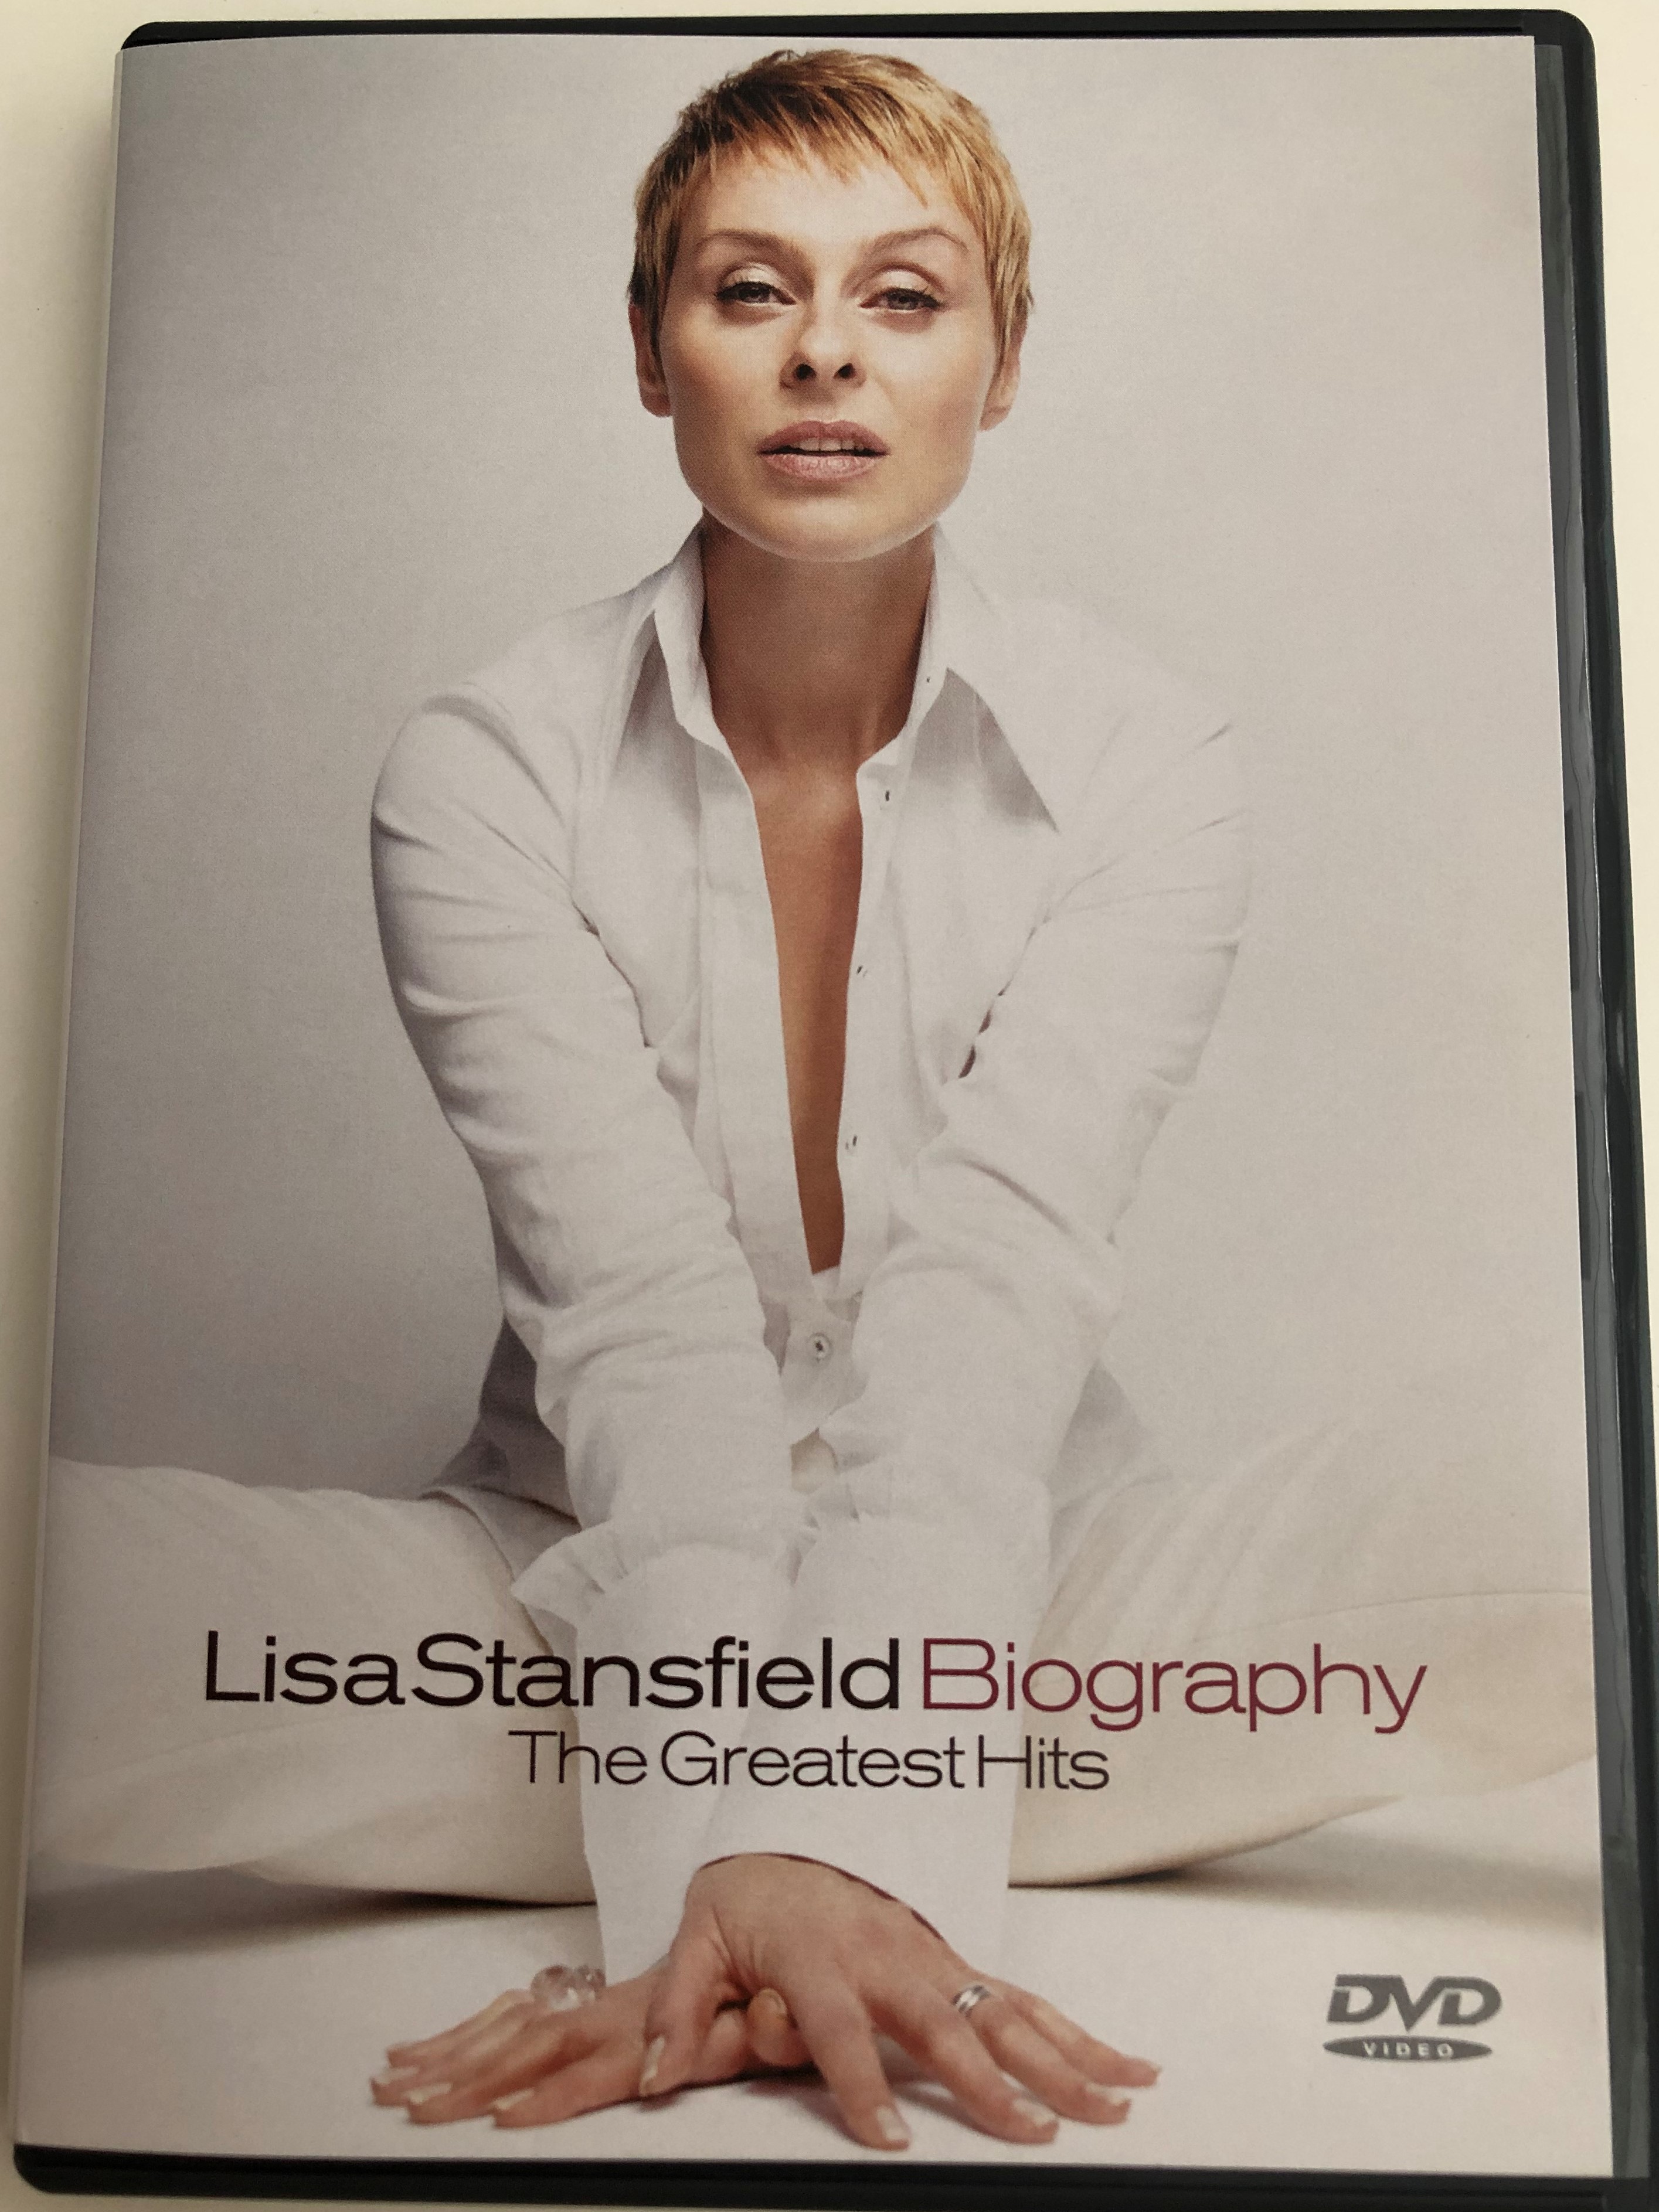 lisa-stansfield-biography-the-greatest-hits-dvd-2003-bmg-1-.jpg